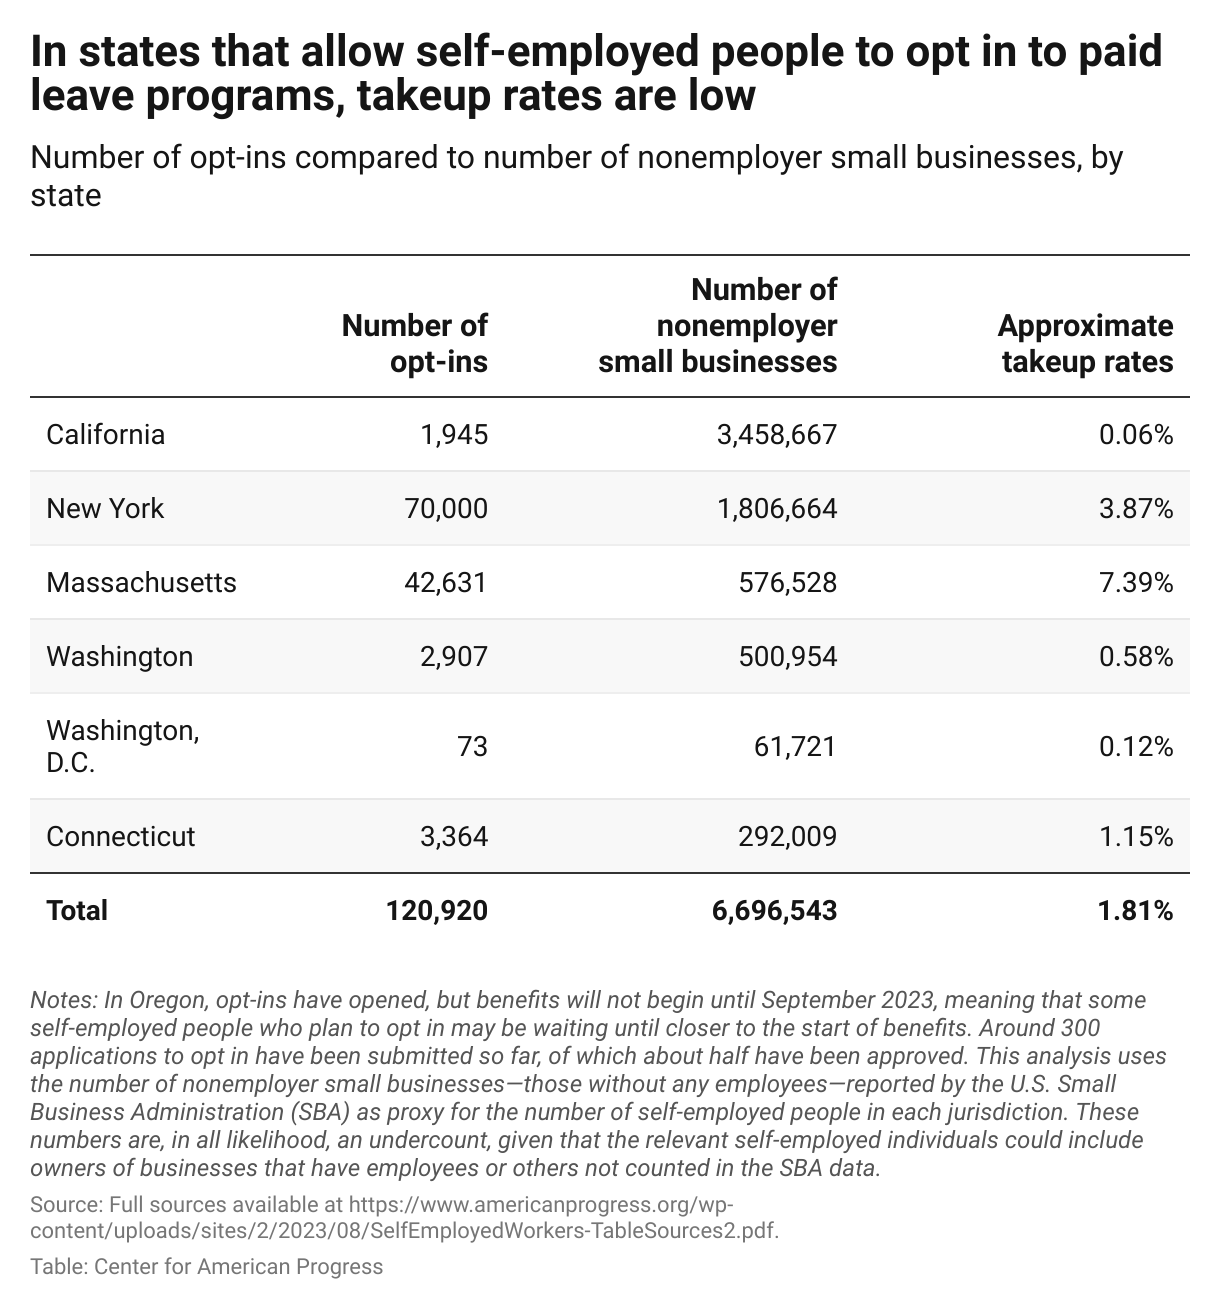 Table showing the number of self-employed people who have opted into state paid leave coverage, including as a percentage of all nonemployer small businesses.